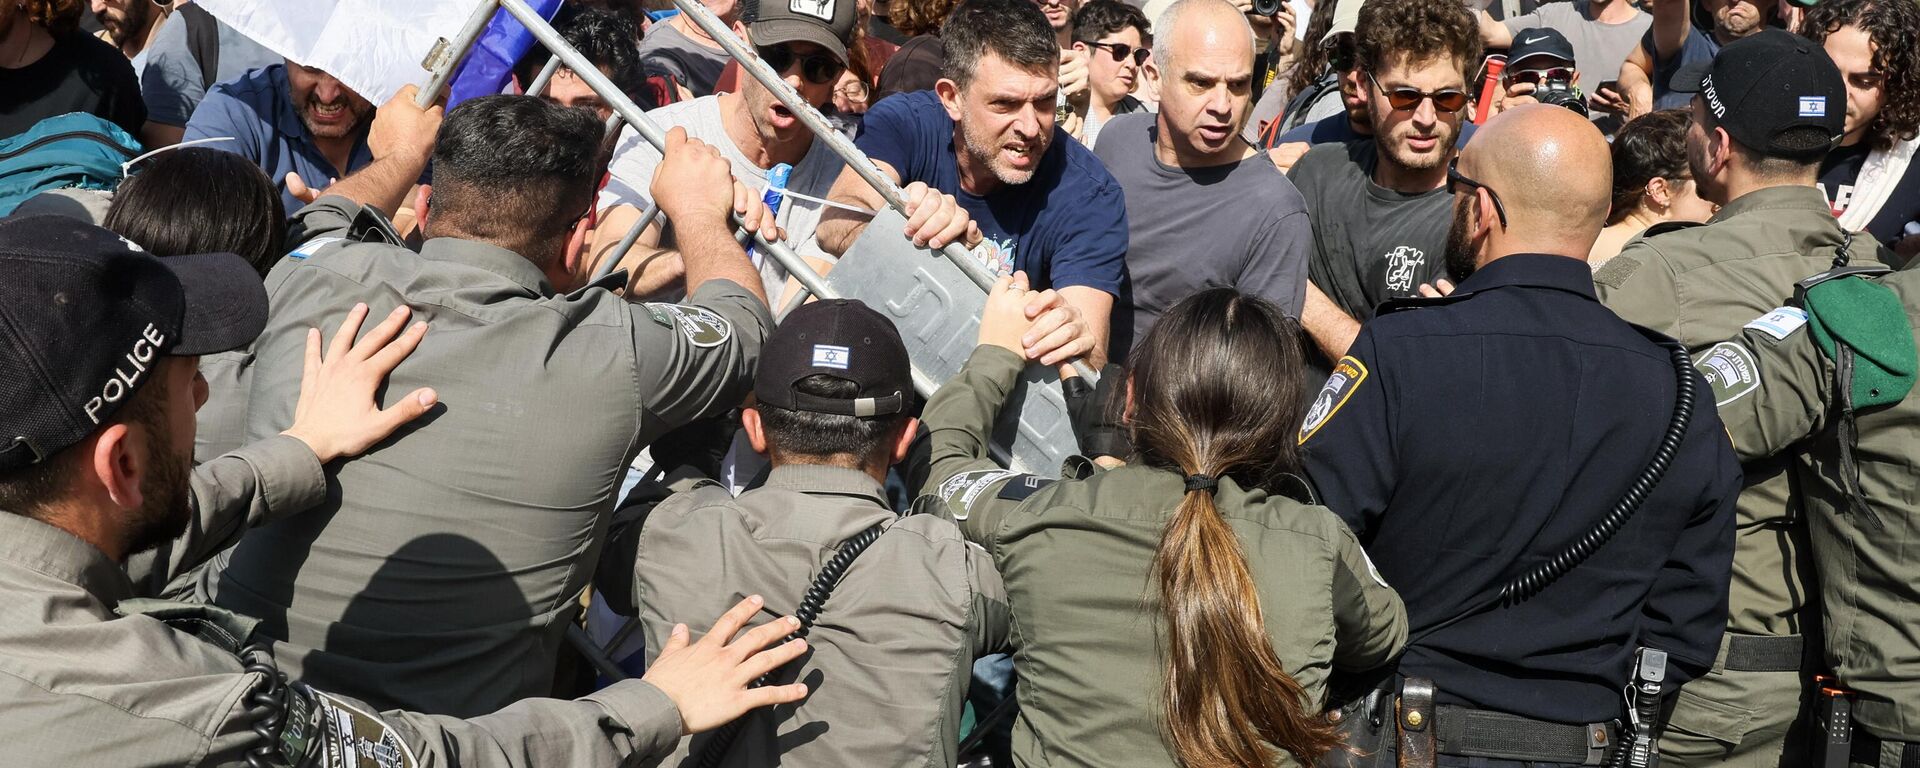 Protesters scuffle with members of Israeli security forces during a demonstration against the government's controversial justice reform bill in Tel Aviv on March 1, 2023. (Photo by JACK GUEZ / AFP) - Sputnik Türkiye, 1920, 02.03.2023